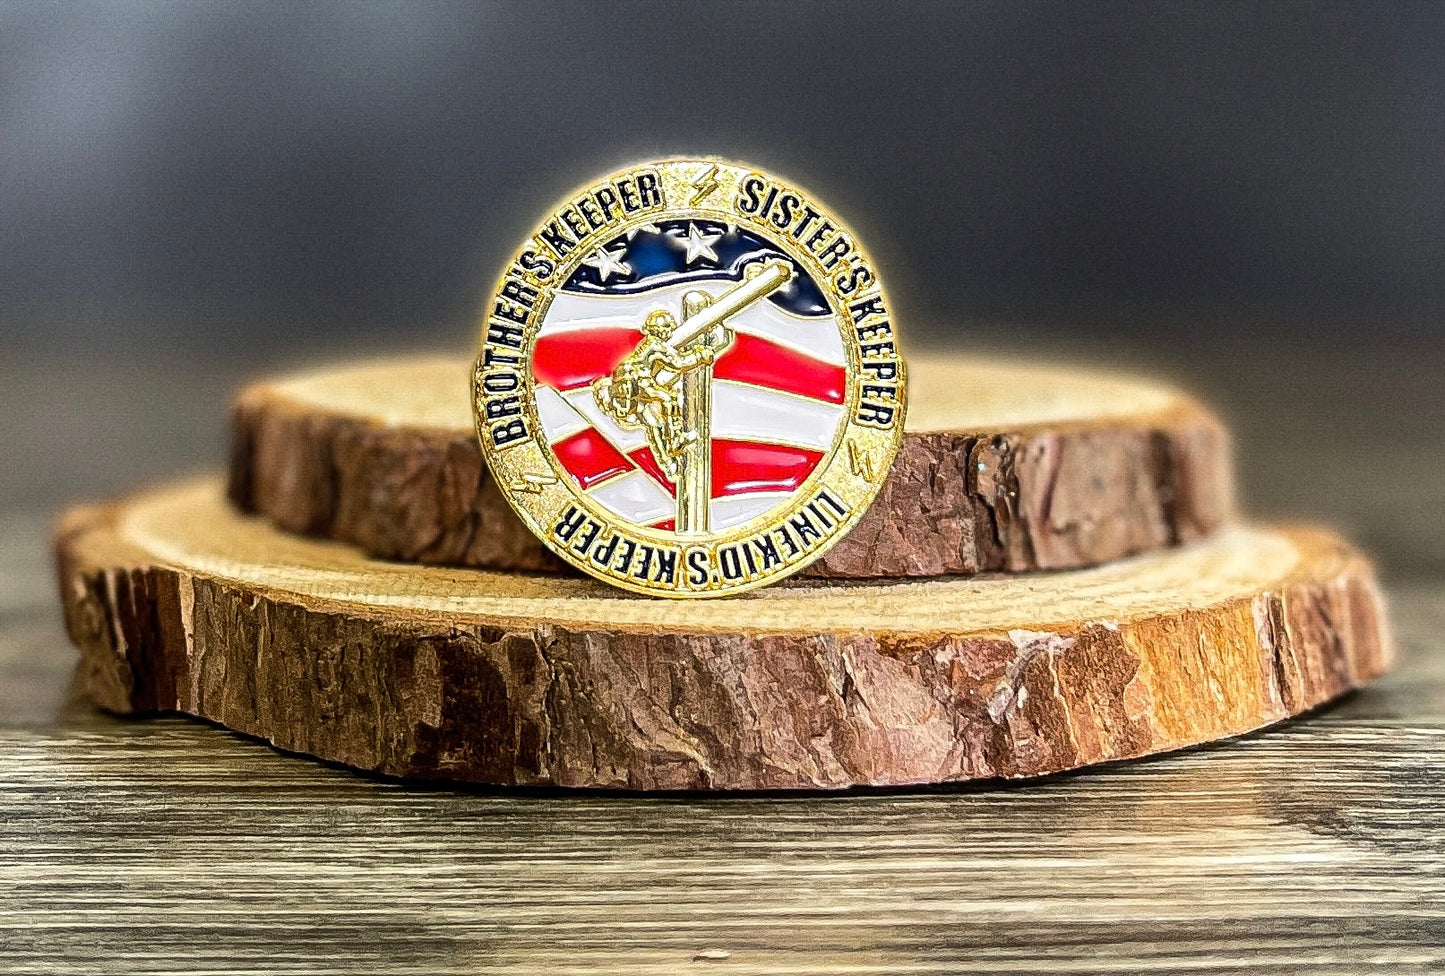 LineLady Challenge Coin